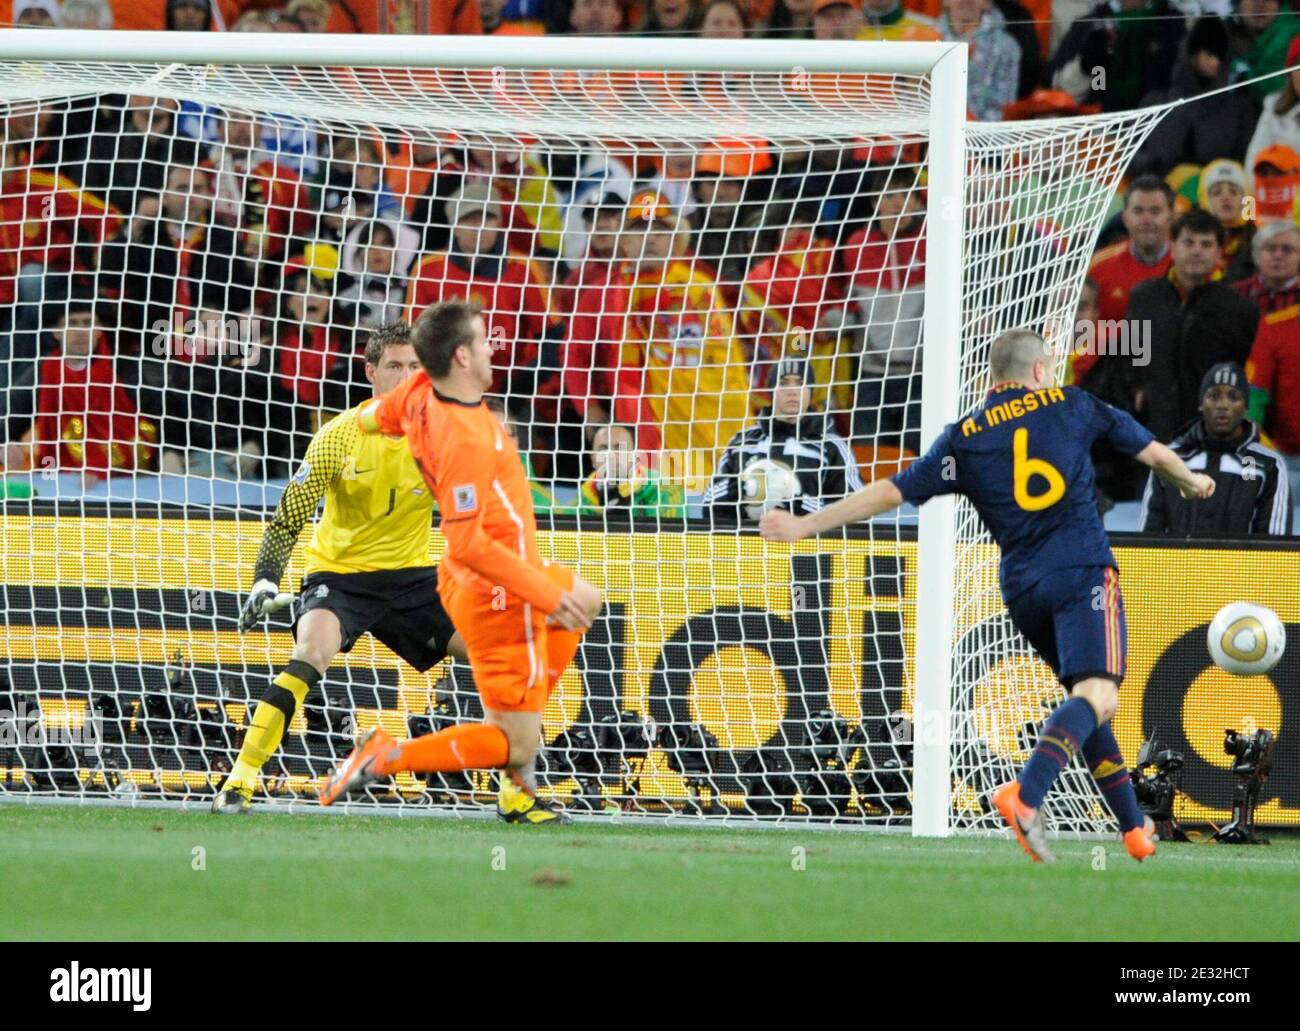 Spain's Andres Iniesta scoring the 1-0 goal in the 2010 FIFA World Cup South Africa Final Soccer match, Spain vs Netherlands at Soccer City football stadium in Johannesburg, South Africa on July 11th, 2010. Spain won 1-0. Photo by Henri Szwarc/ABACAPRESS.COM Stock Photo